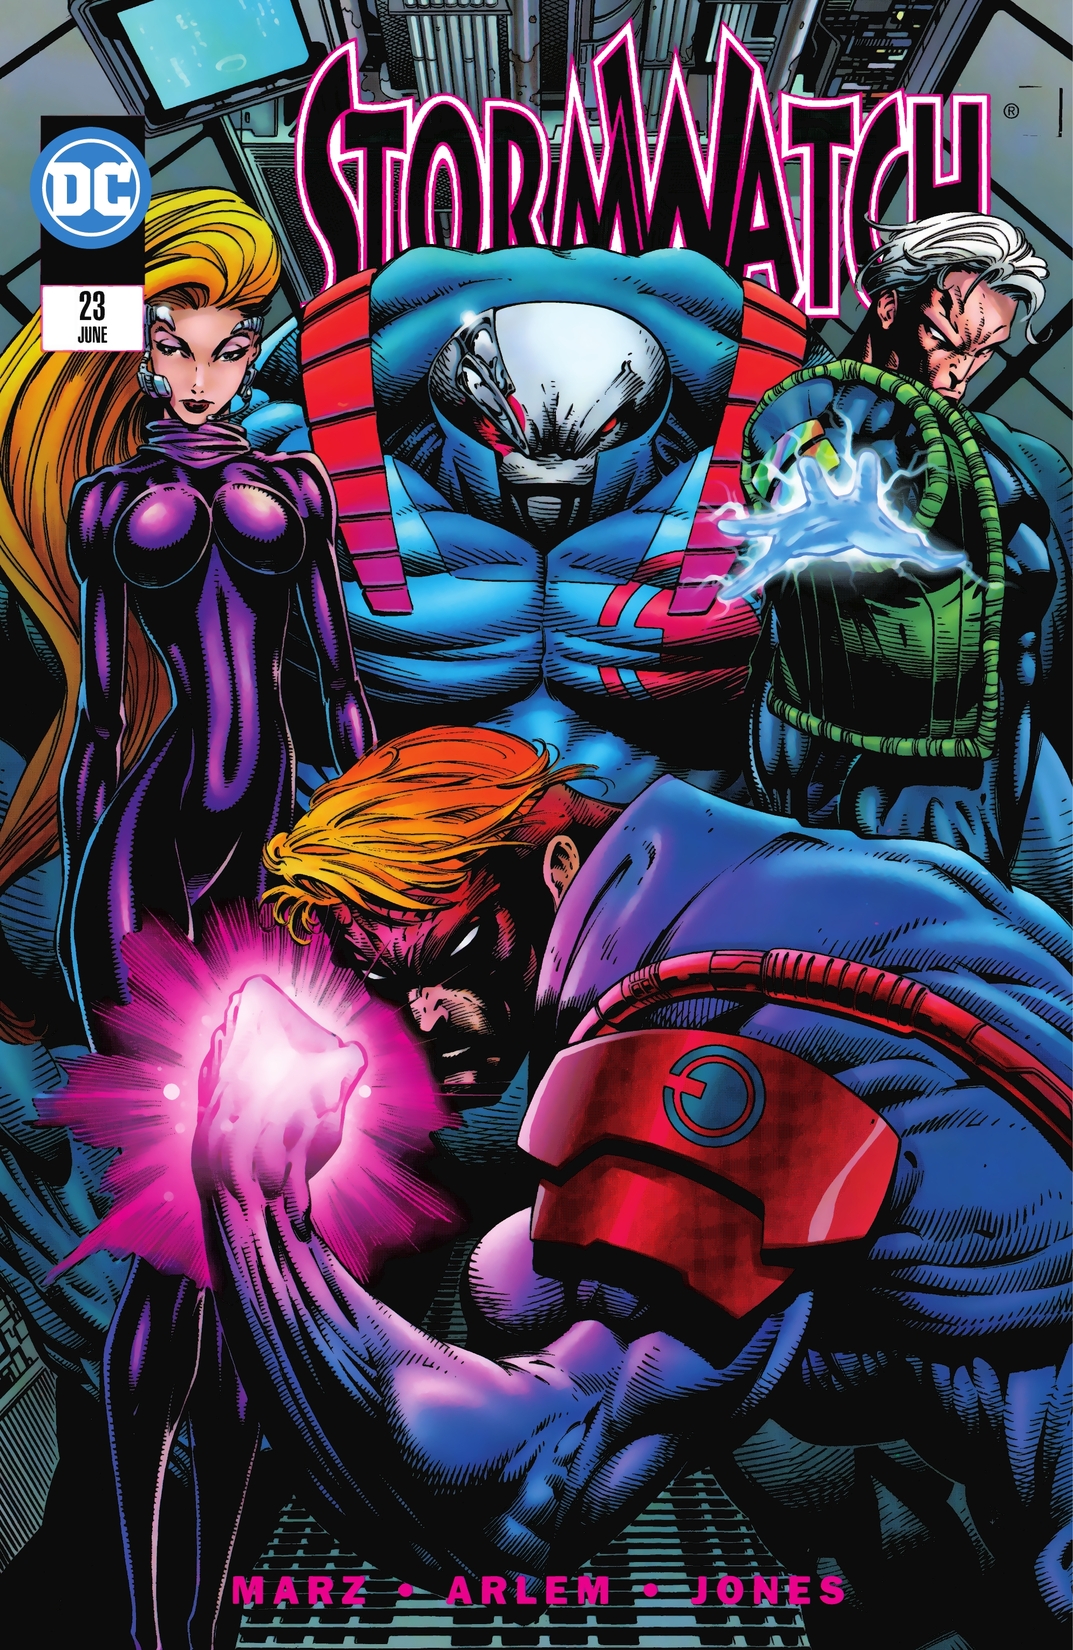 Stormwatch #23 preview images